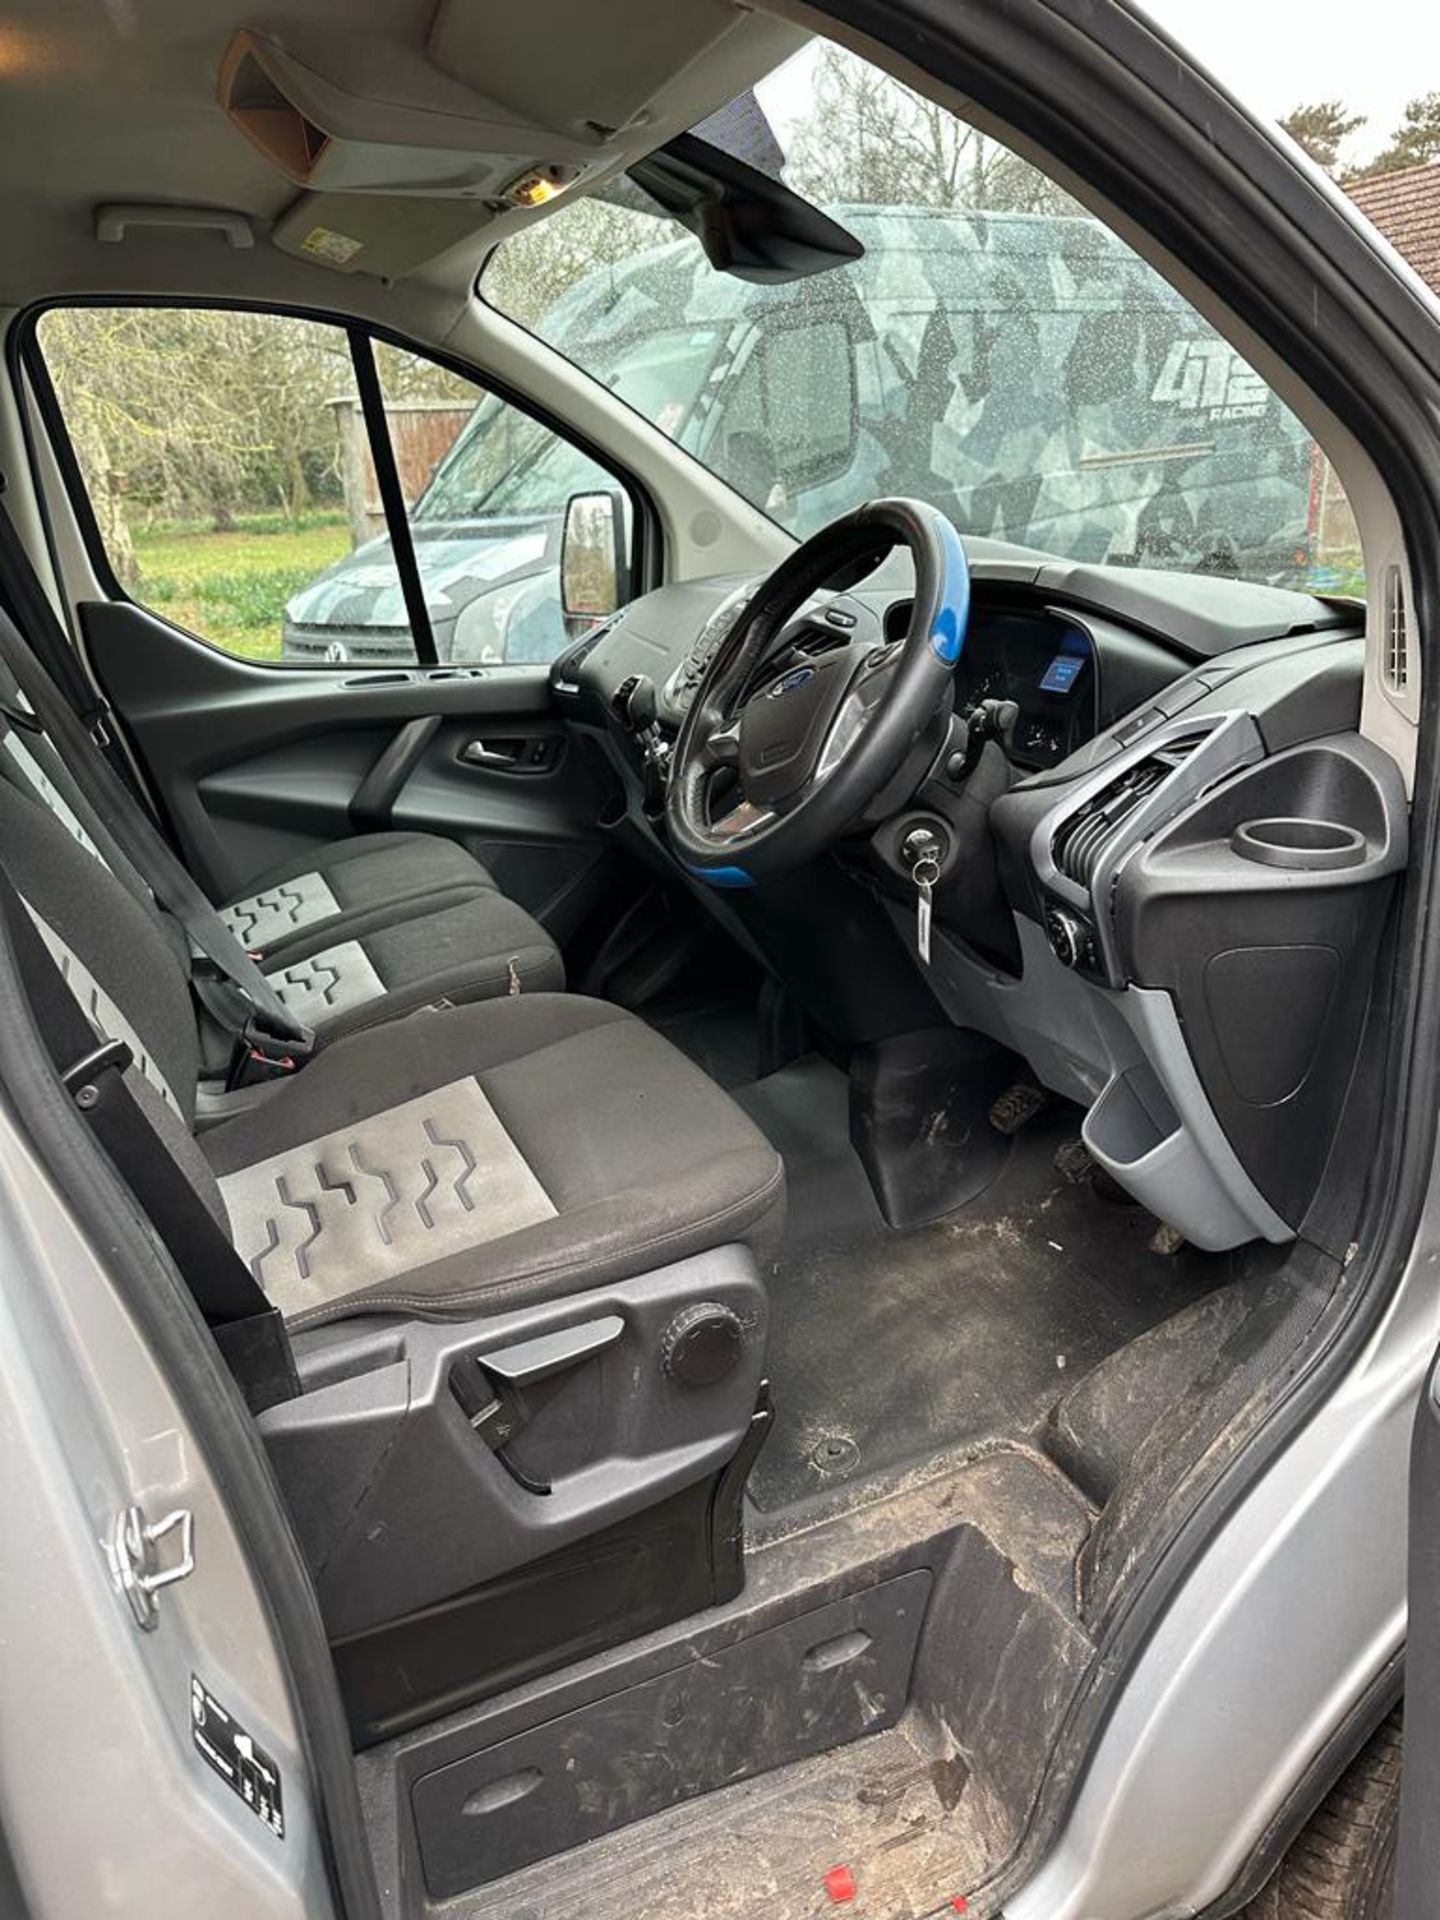 2018 18 FORD TRANSIT CUSTOM PANEL VAN - 148K MILES - LIMITED - EURO 6 - ALLOY WHEELS - AIR CON - Image 8 of 8